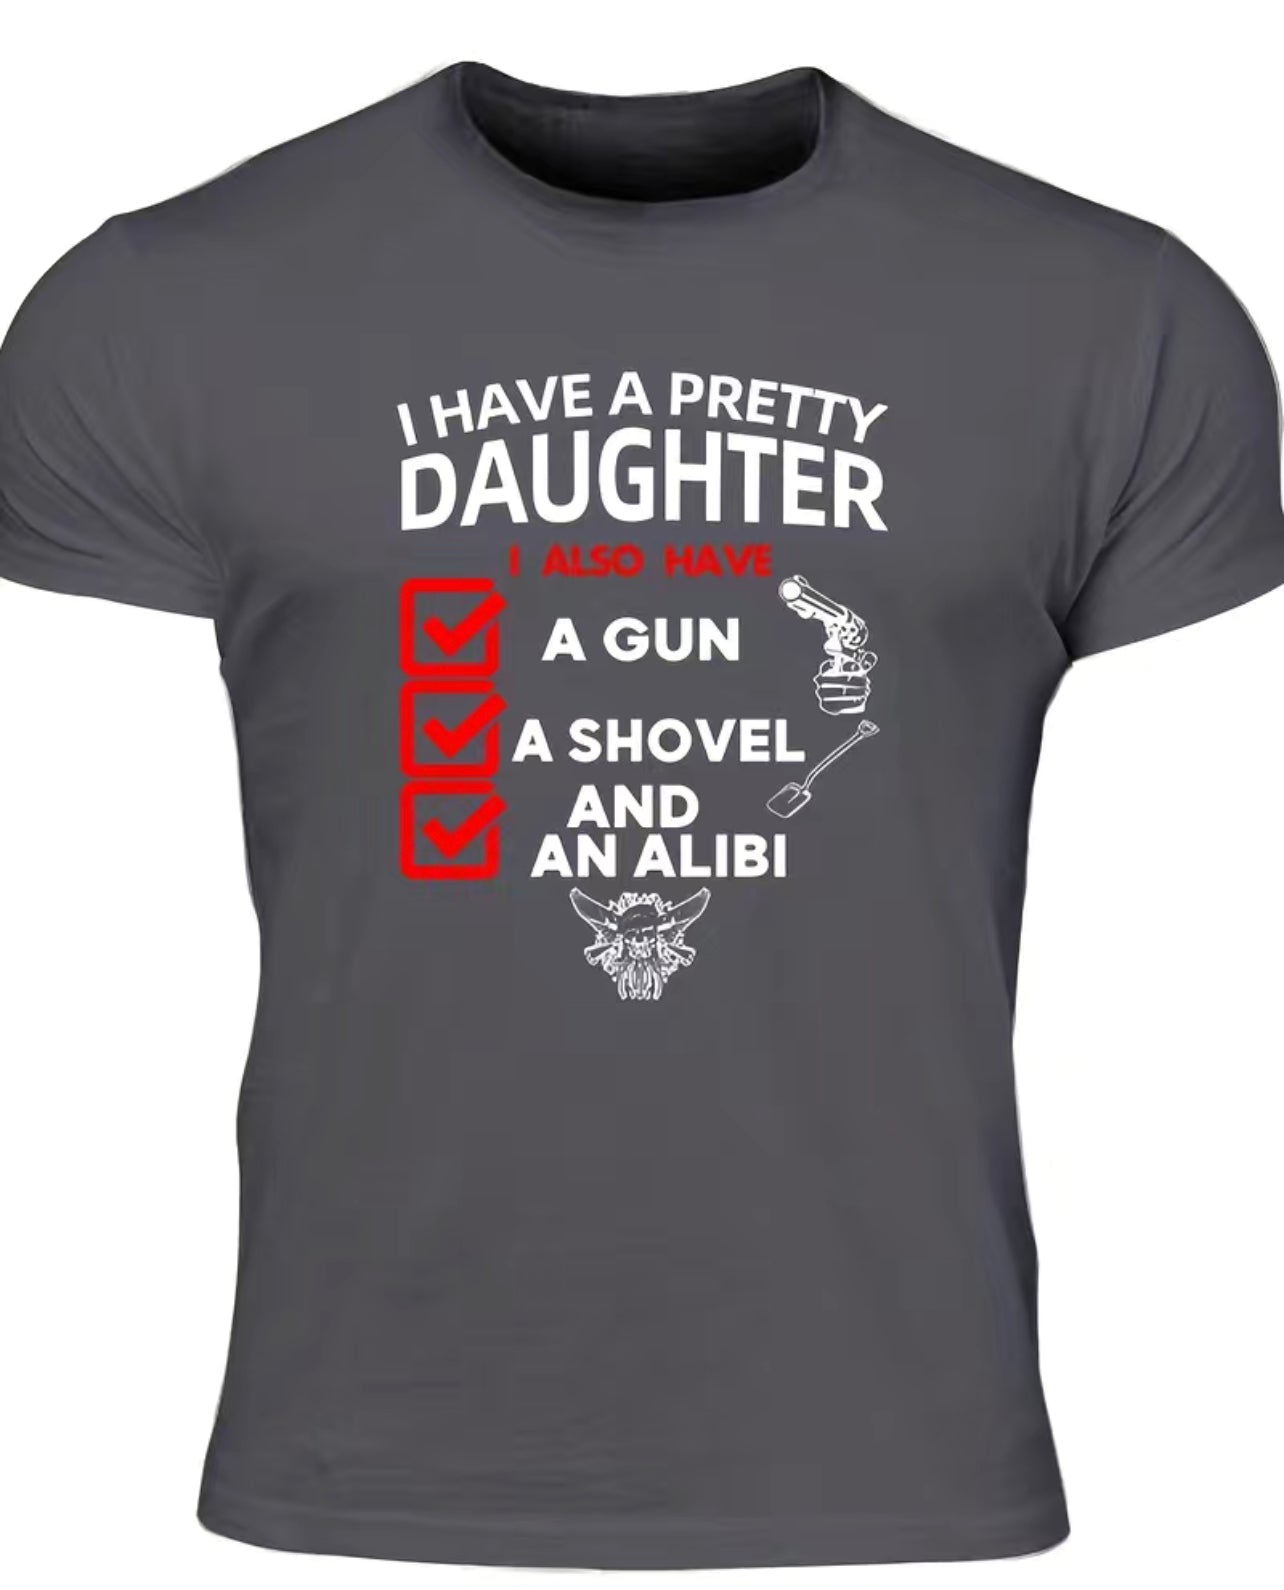 “I HAVE A PRETTY DAUGHTER” Print Modern Dad T-Shirt